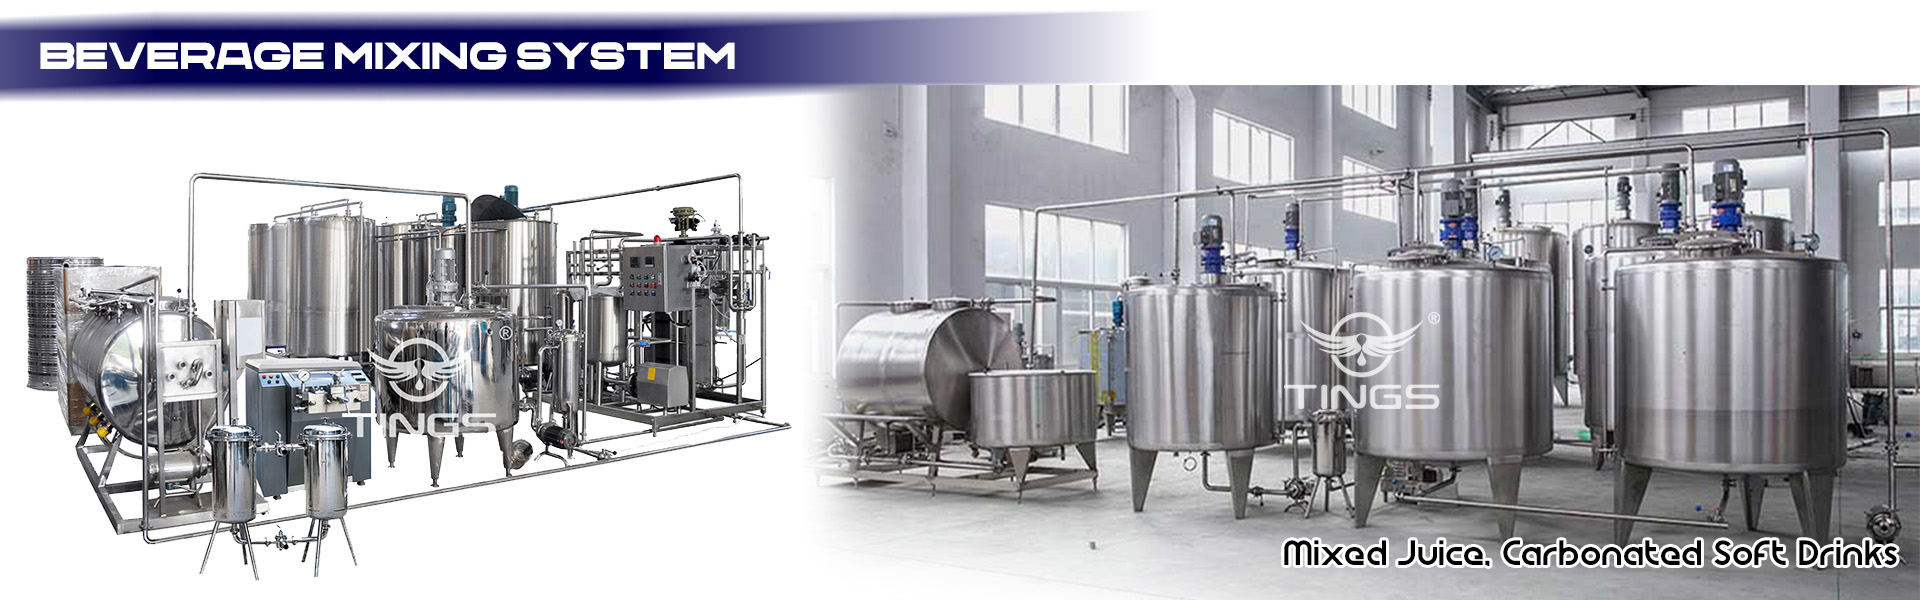 Beverage Mixing System